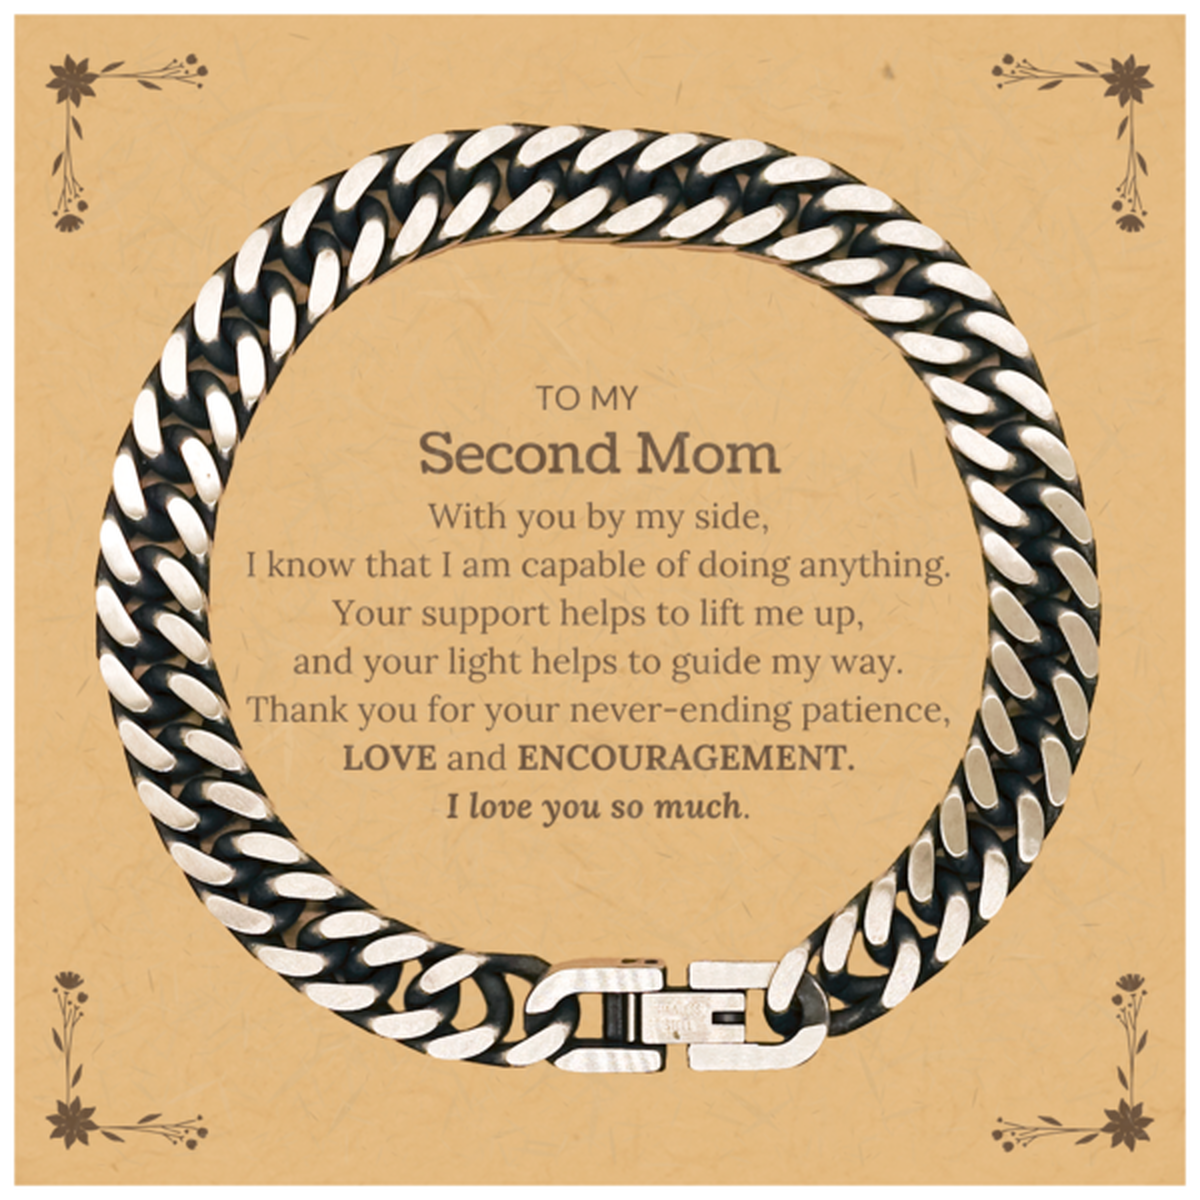 Appreciation Second Mom Cuban Link Chain Bracelet Gifts, To My Second Mom Birthday Christmas Wedding Keepsake Gifts for Second Mom With you by my side, I know that I am capable of doing anything. I love you so much